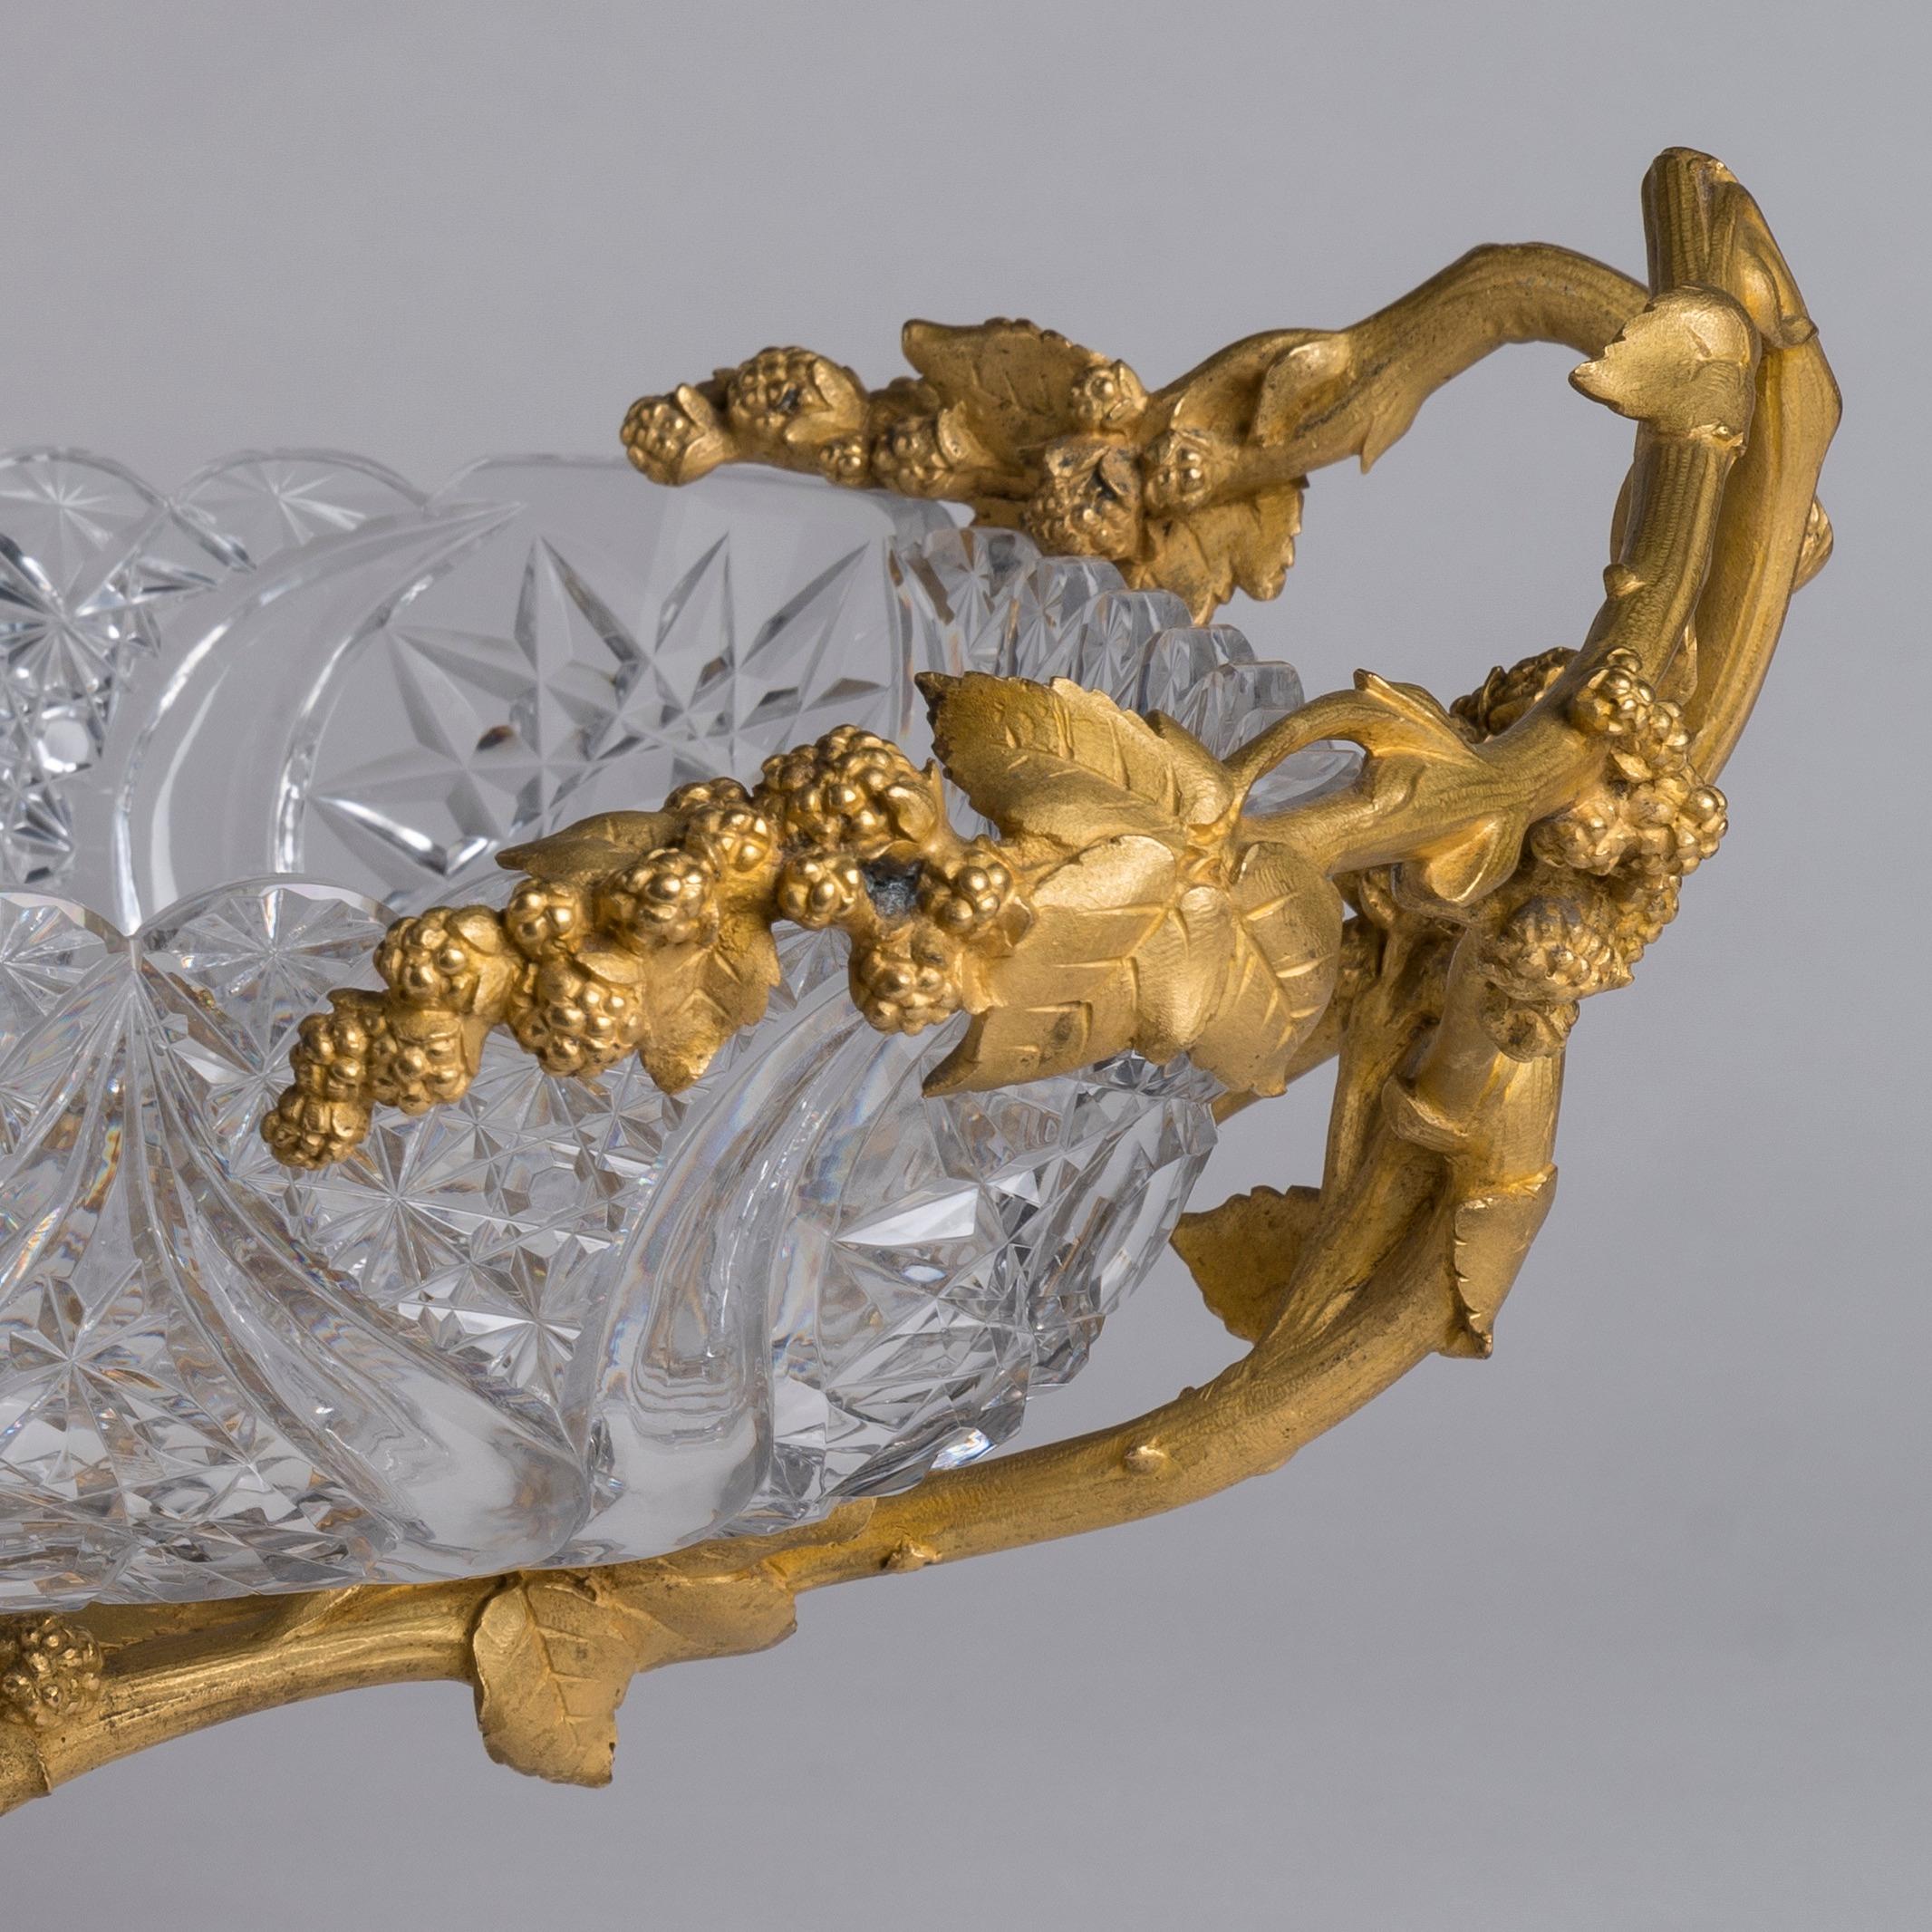 19th Century French Ormolu-Mounted Crystal Centrepiece attributed to Baccarat For Sale 1